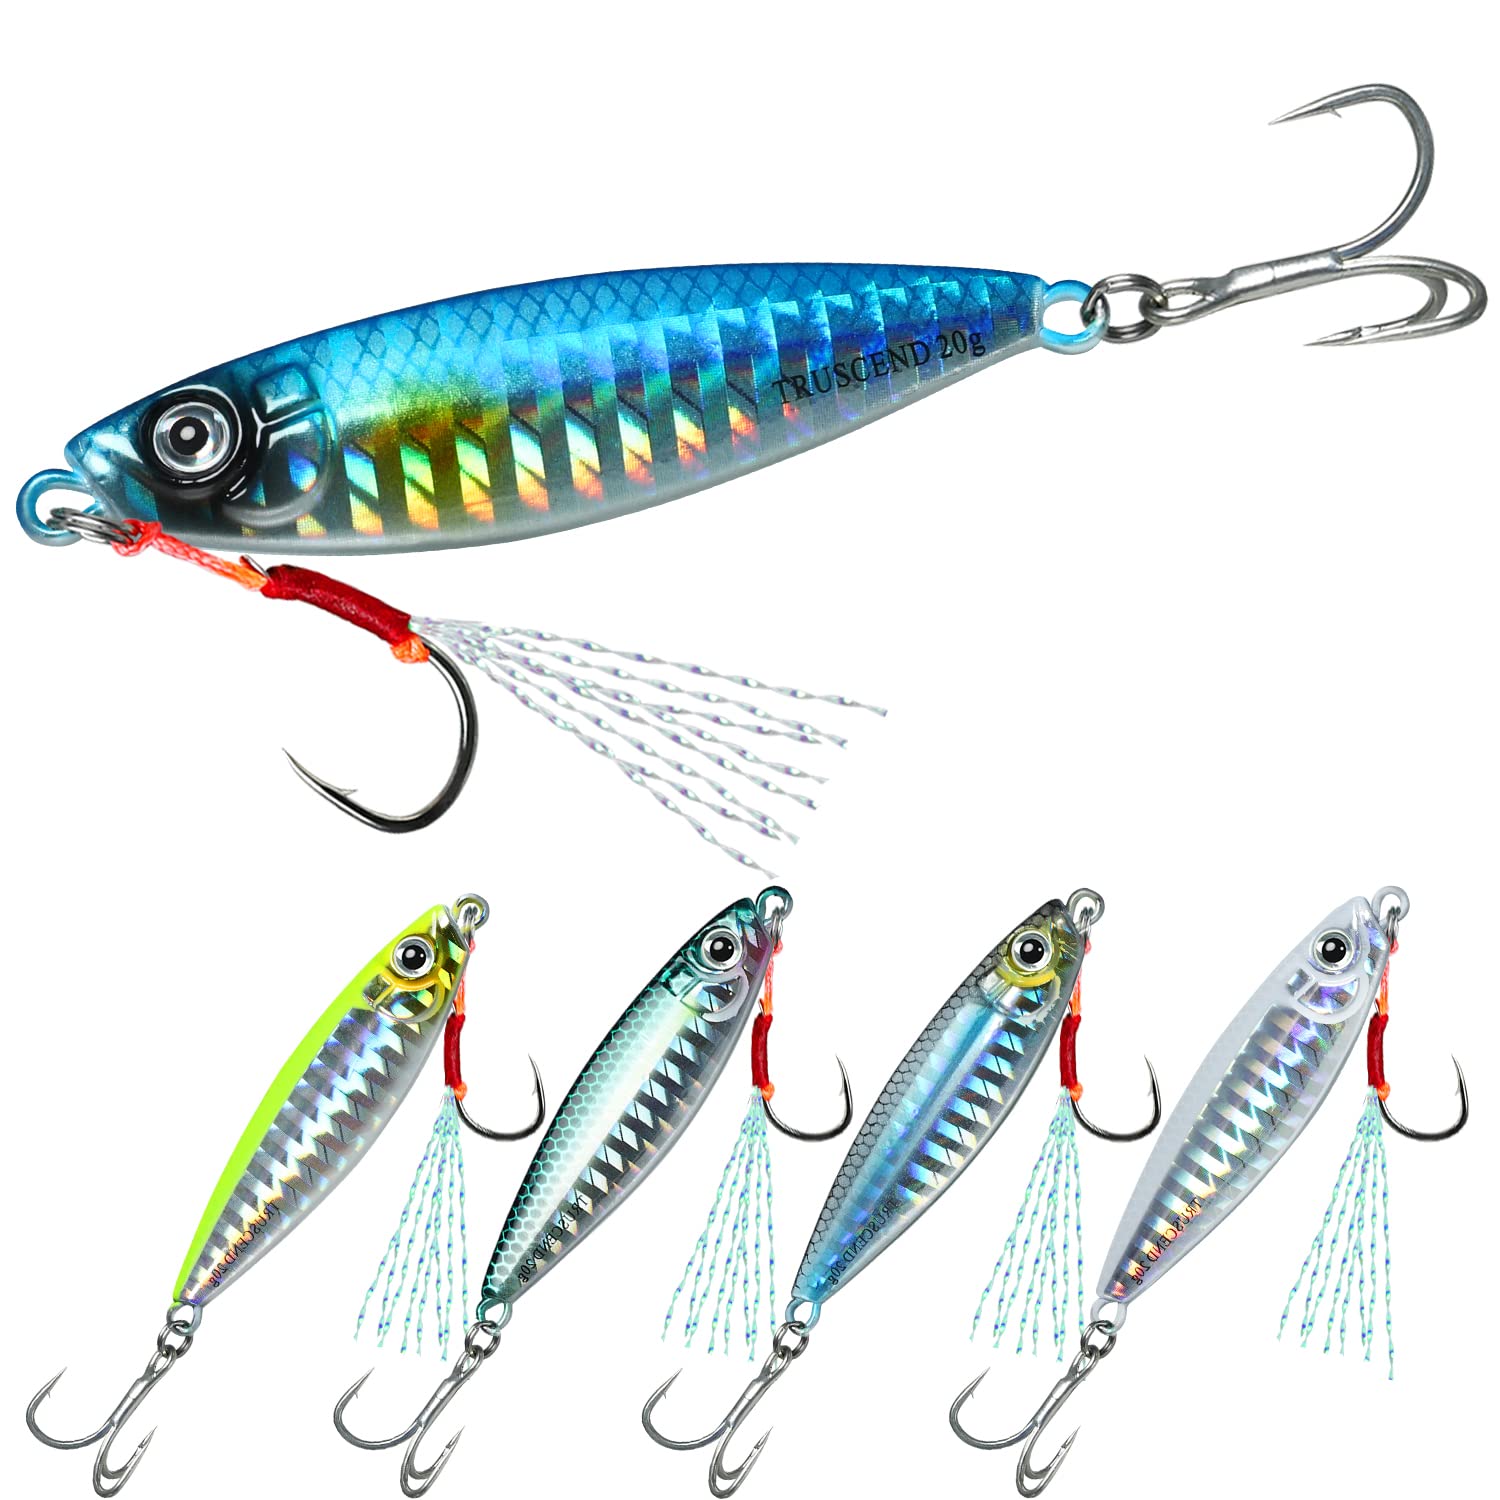 Fishing Jigs Lures 5~20g Saltwater Fishing Lures Spoons Jigging Lures VIB  Sinking Freshwater Fishing Lures for Bass Trout Salmon